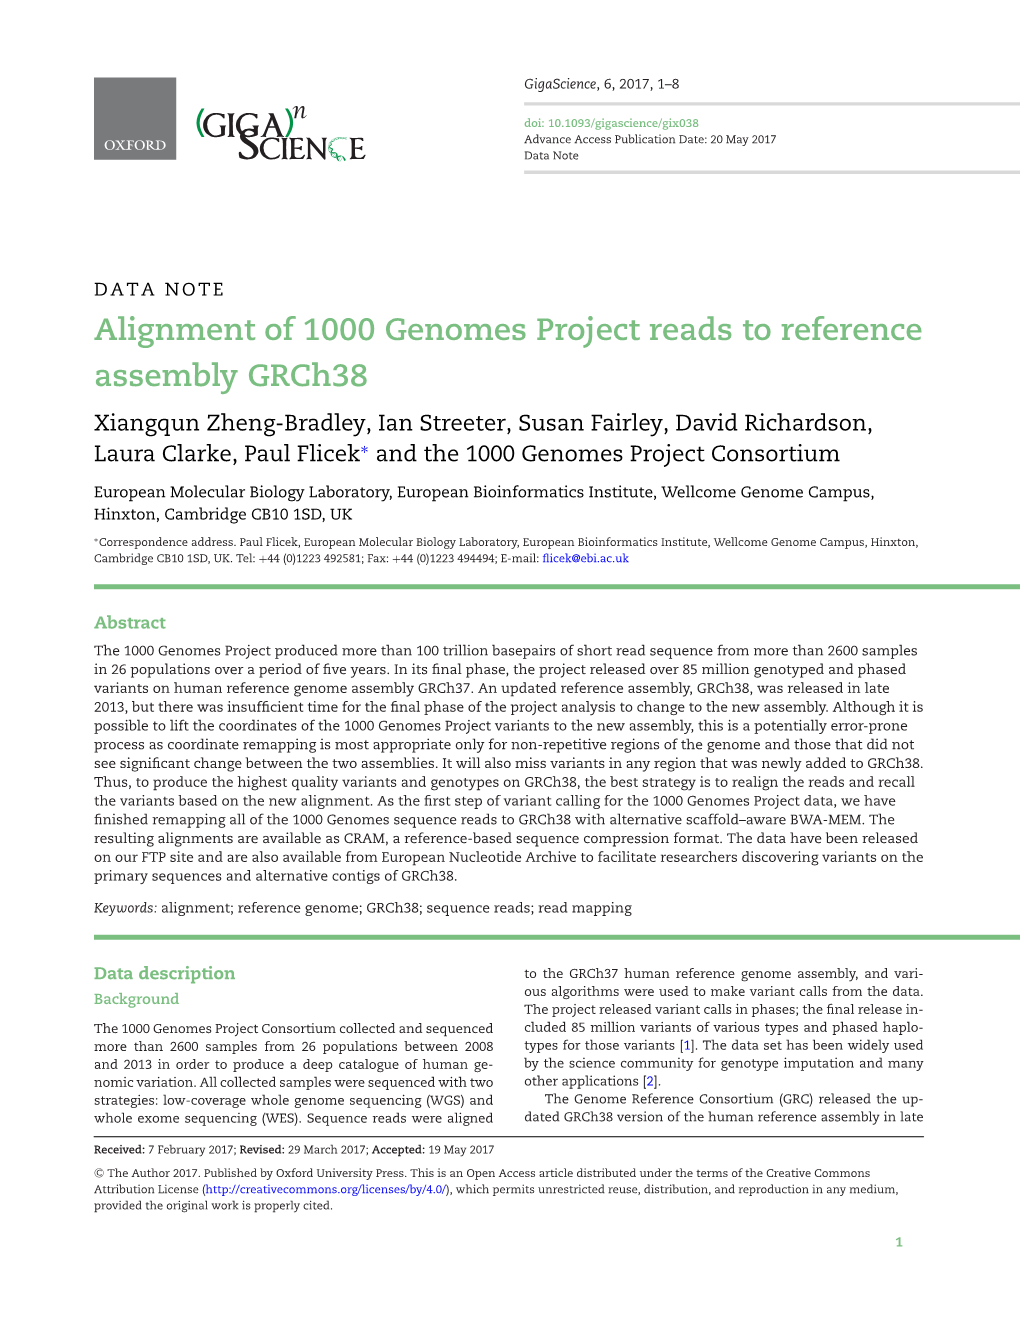 Alignment of 1000 Genomes Project Reads to Reference Assembly Grch38